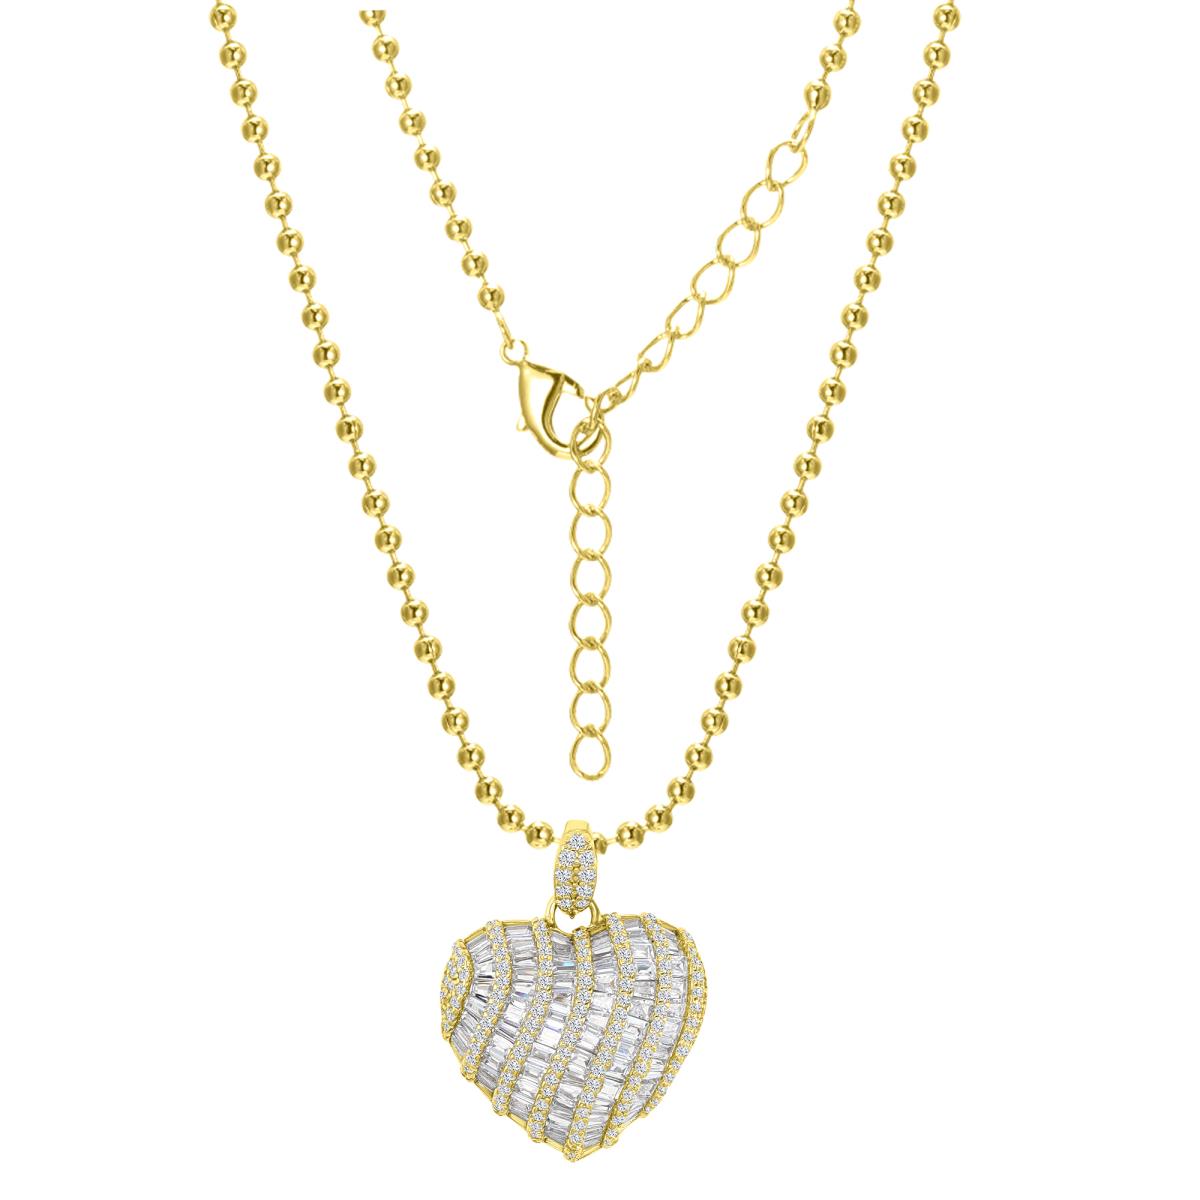 Brass Yellow 26MM Polished White CZ Pave & Baguette Cut Heart Beaded Chain 18+2" Necklace